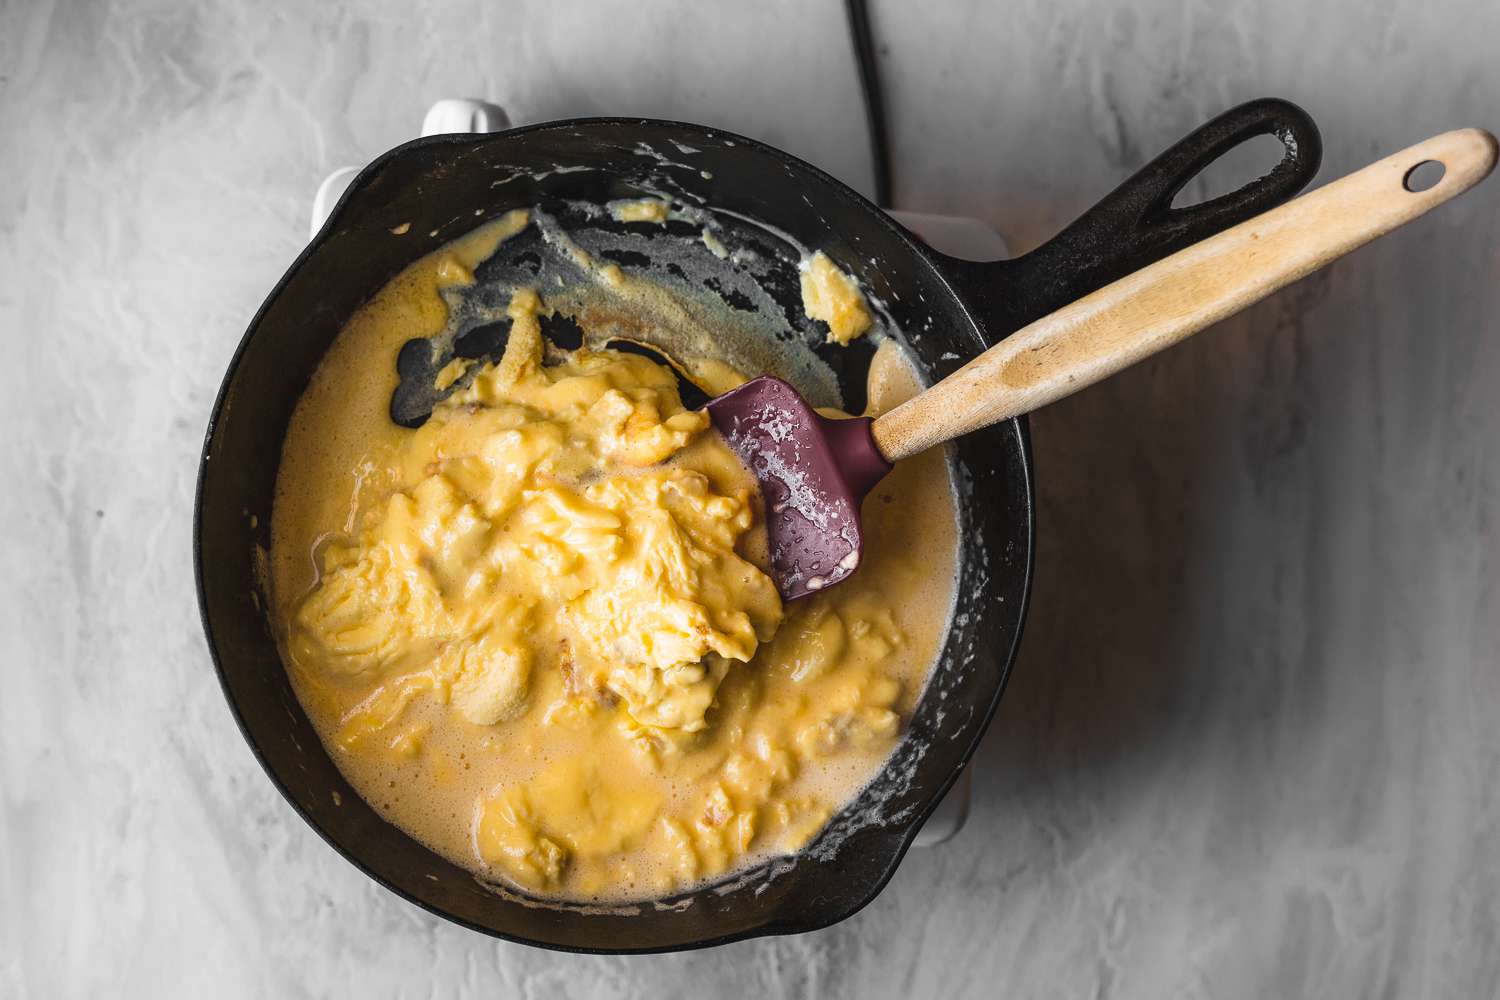 Scrambled eggs in a cast-iron skillet being stirred with a rubber spatula